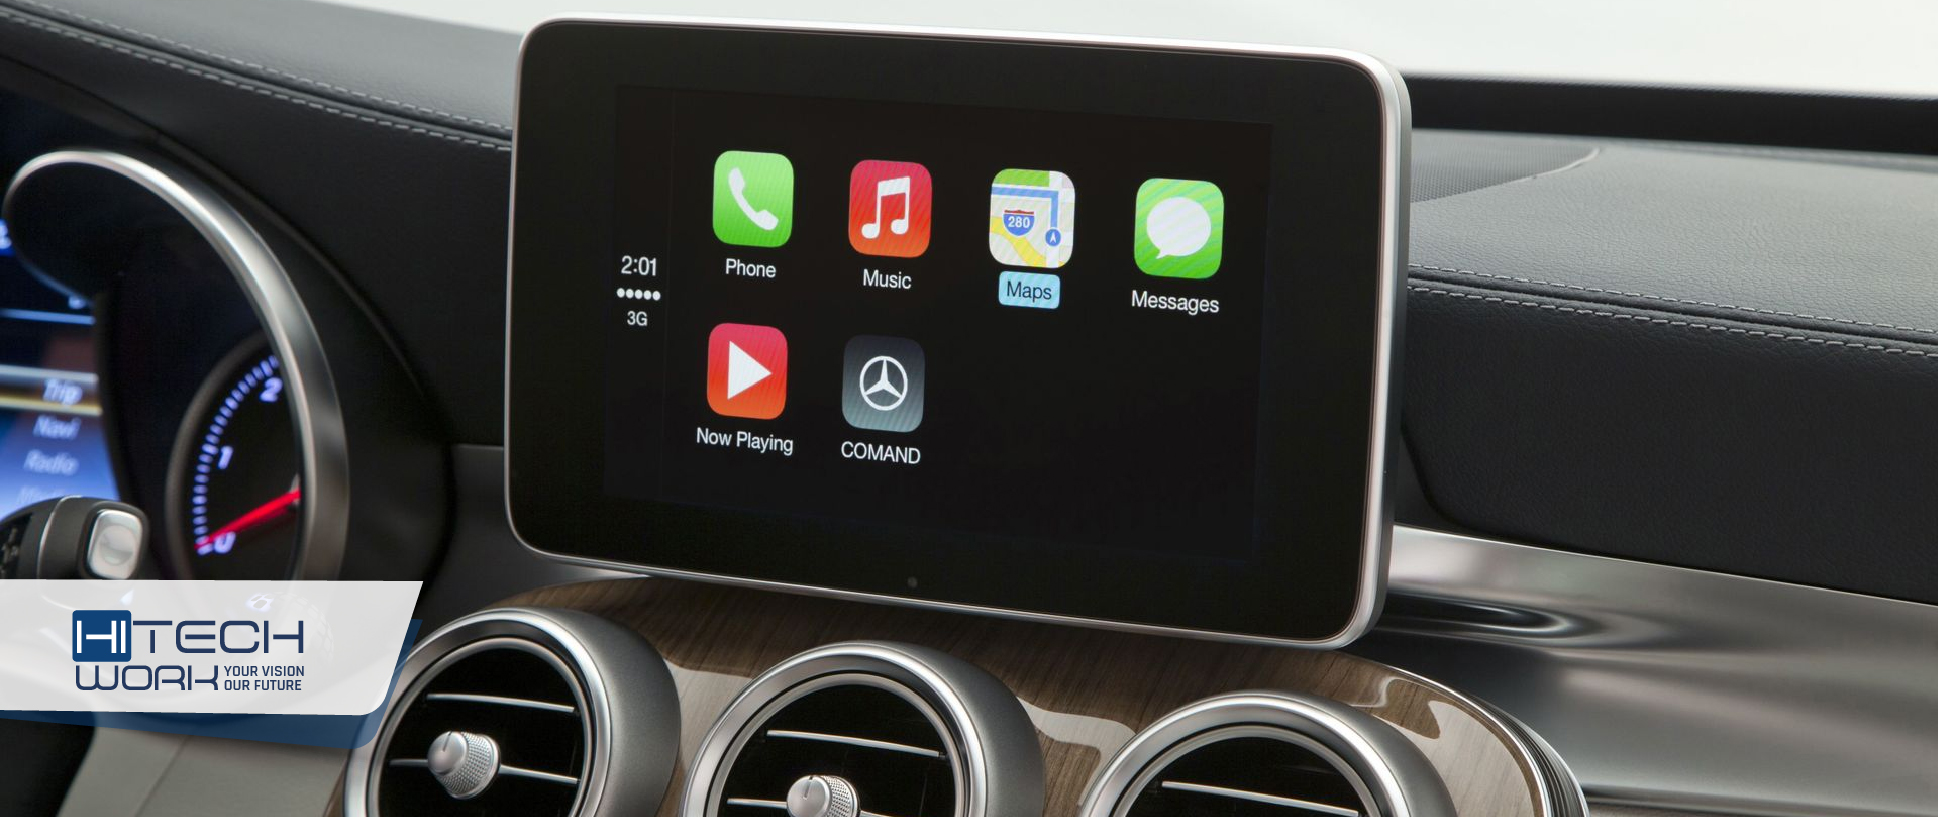 How To Record Snapchat Video With Carplay